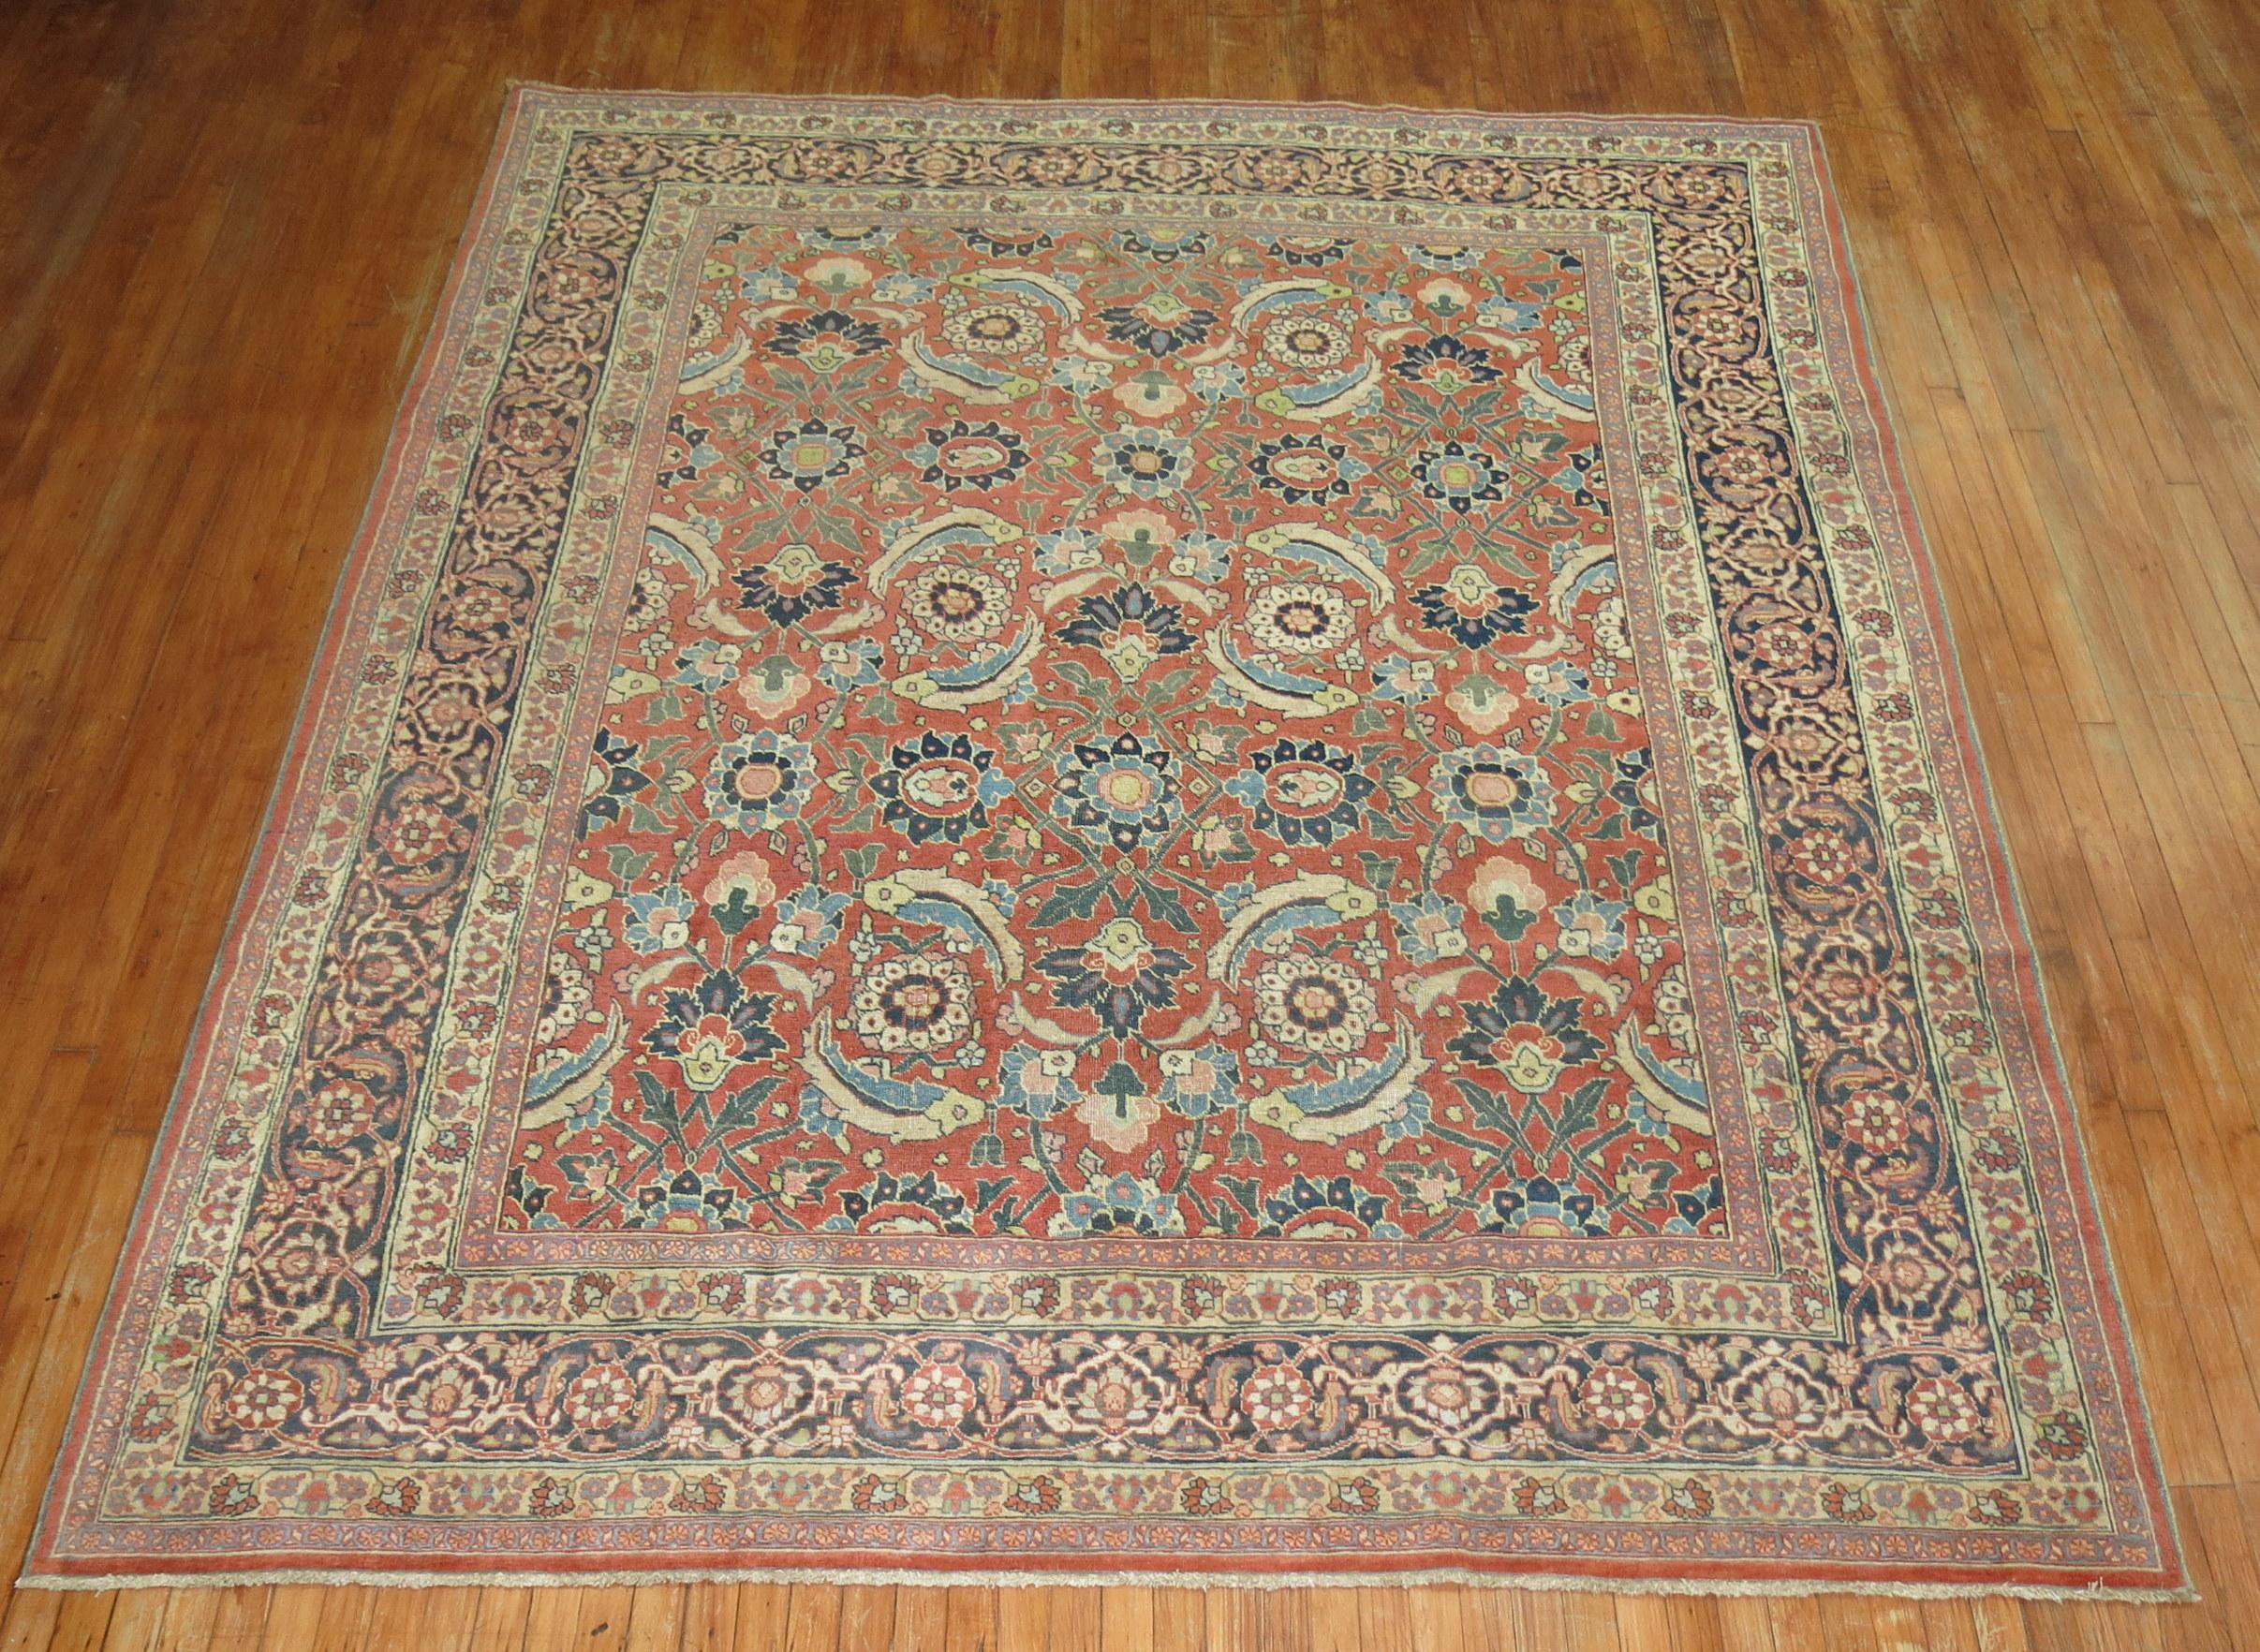 An early 20th century room size Persian Tabriz small square room size rug

Measures: 8'3'' x 9'5''.